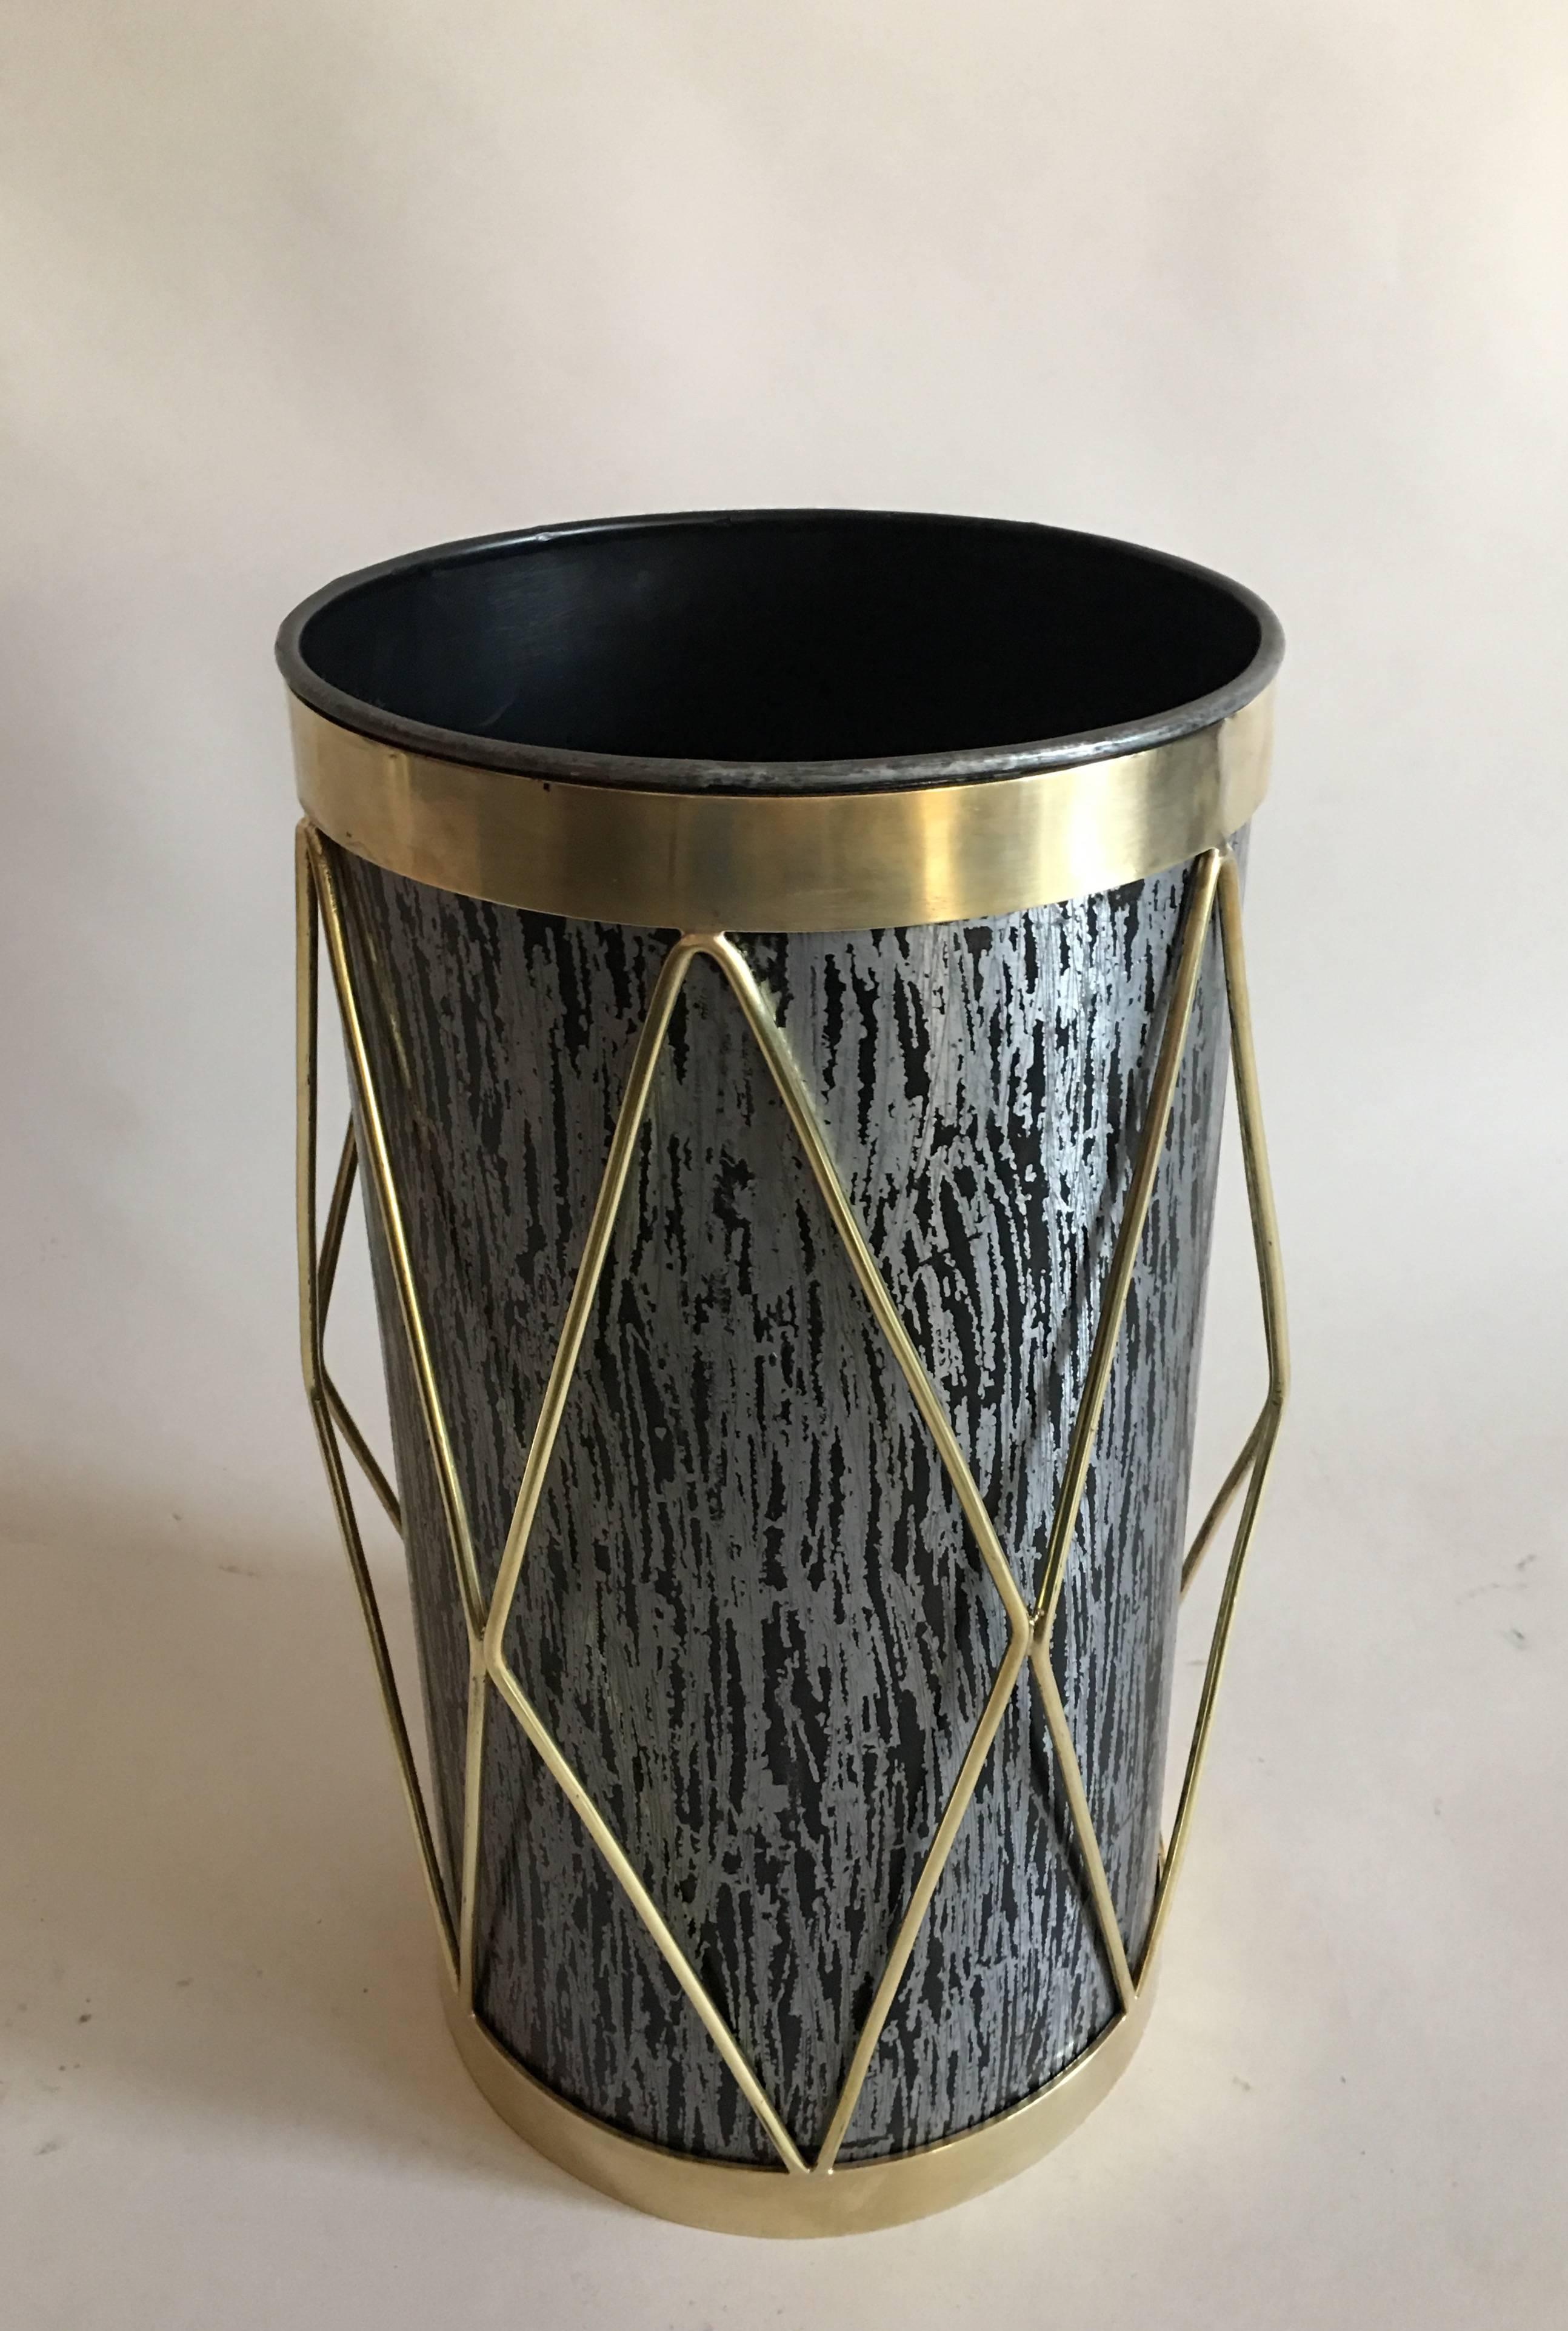 2 French Mid-Century Modern brass and steel umbrella stands, waste baskets / trash cans. 

The pieces are composed of black stippled steel, and adorned with a dramatic brass overlay in a chevron or harlequin pattern.

Priced and sold